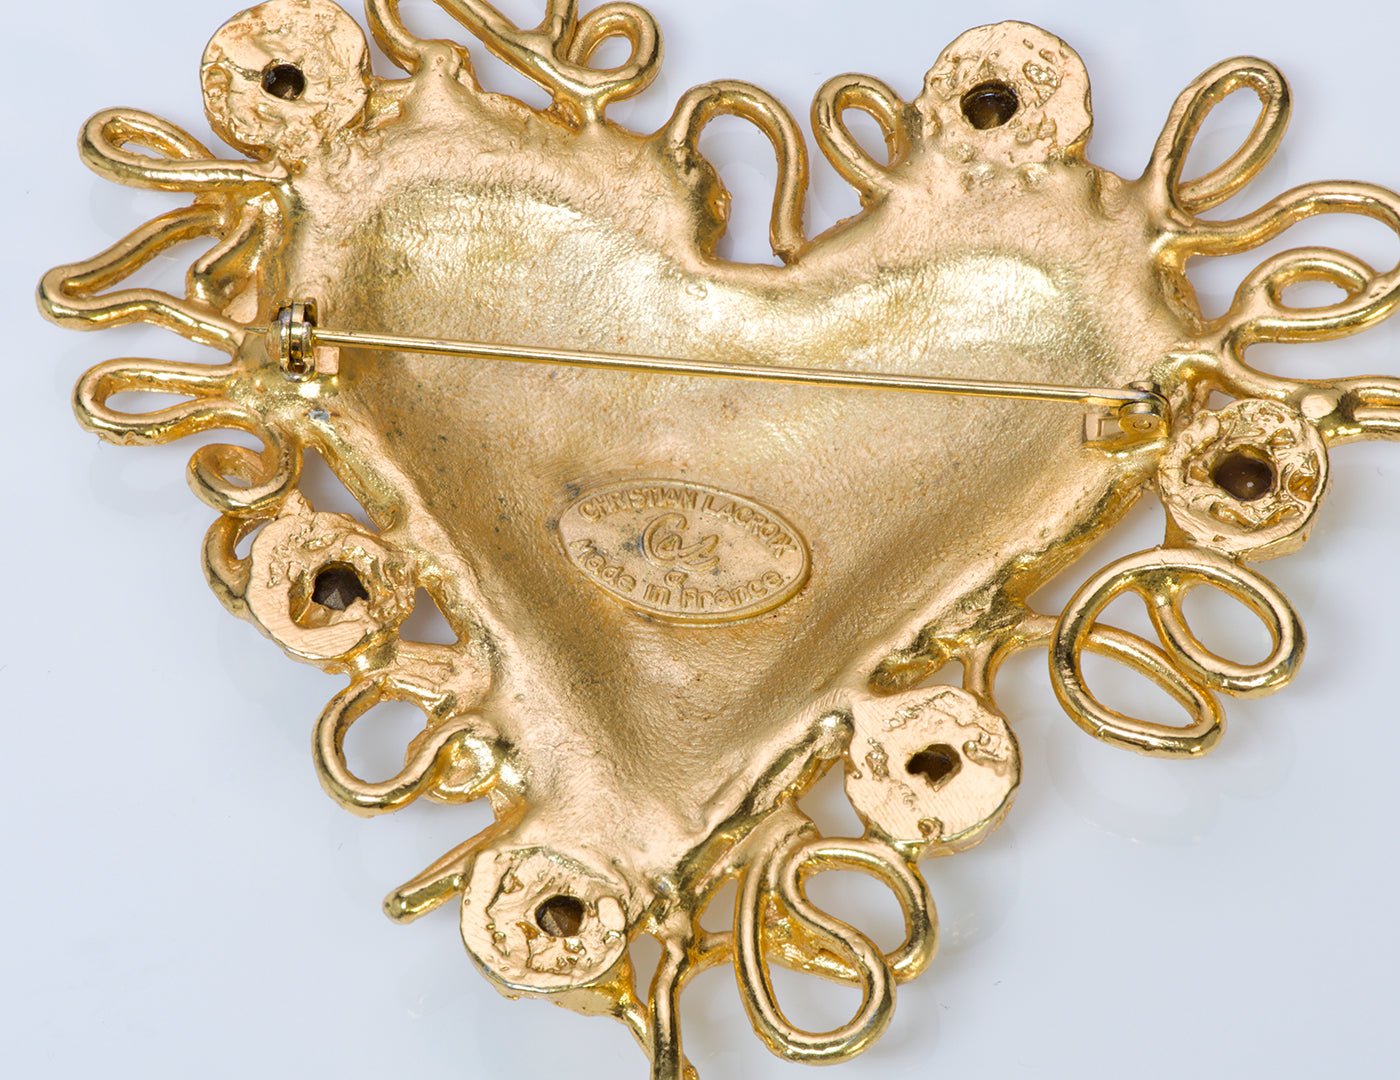 Christian Lacroix Couture Gold Tone Crystal Heart Brooch